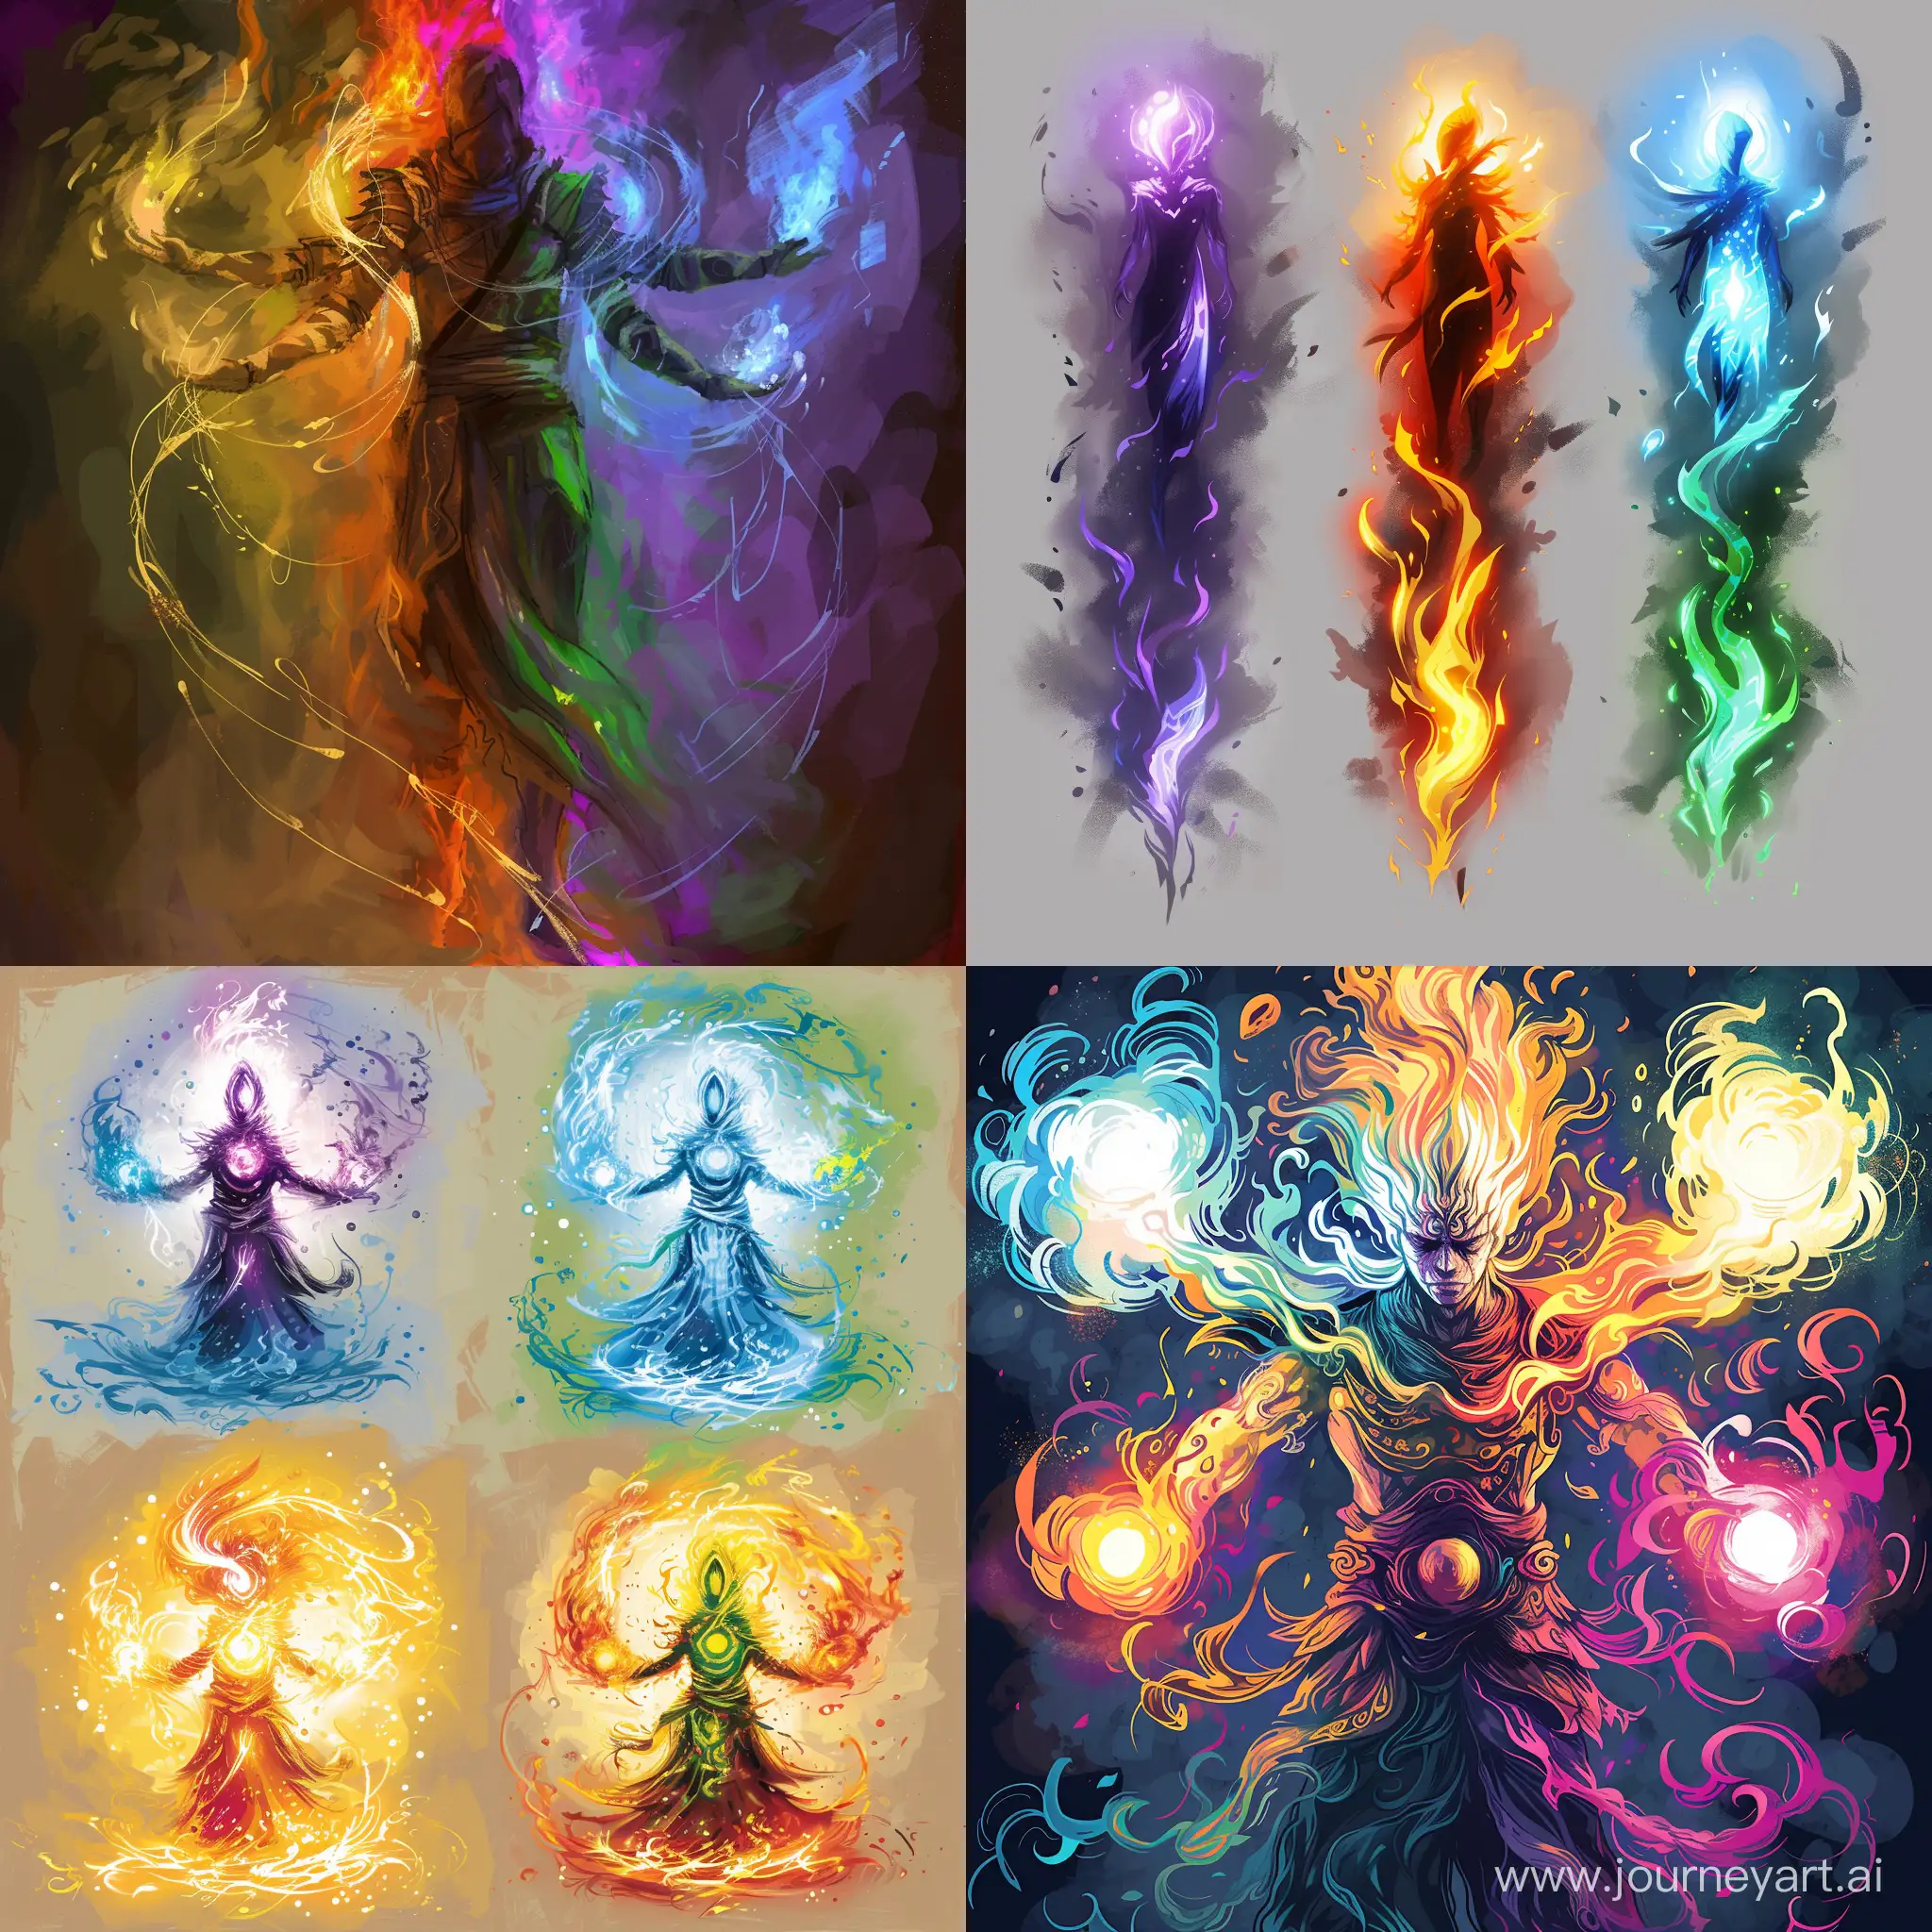 generate 4 types of protective aura. draw everything in the style of hand paint